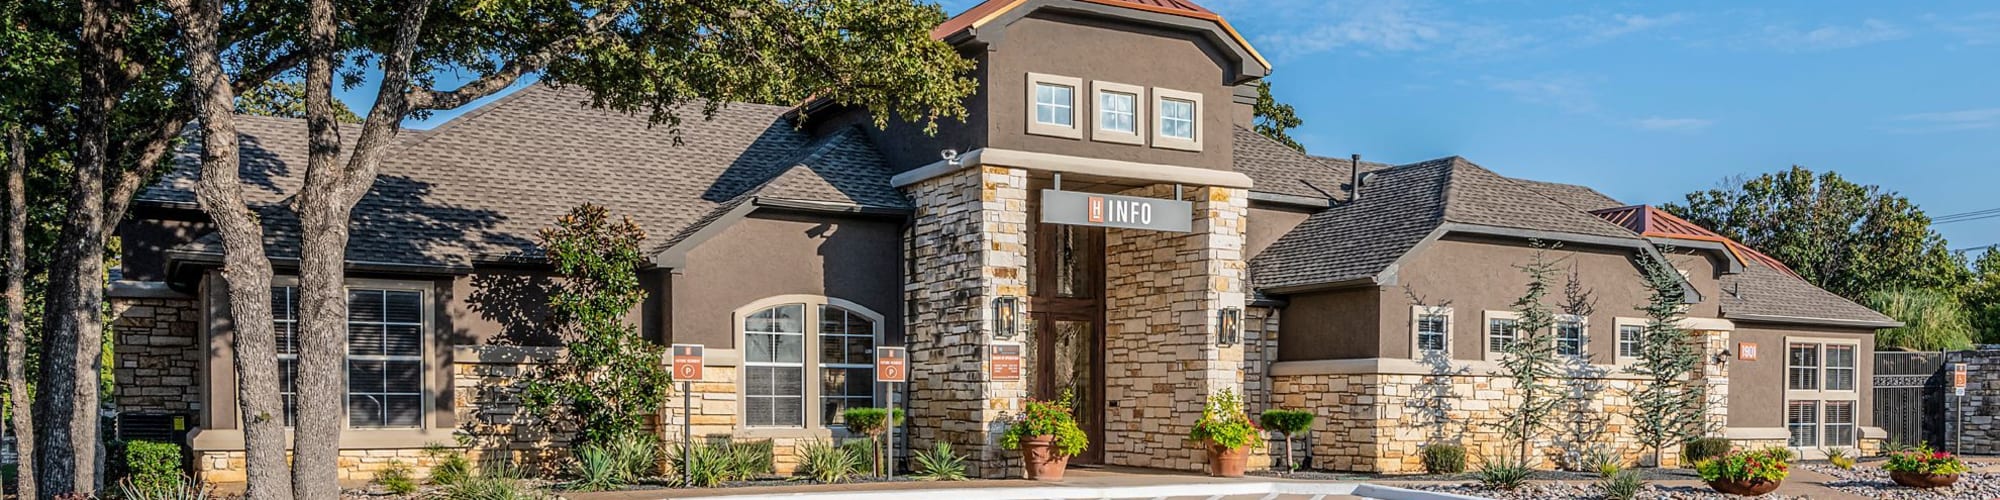 Gallery | The Heights in Arlington, Texas